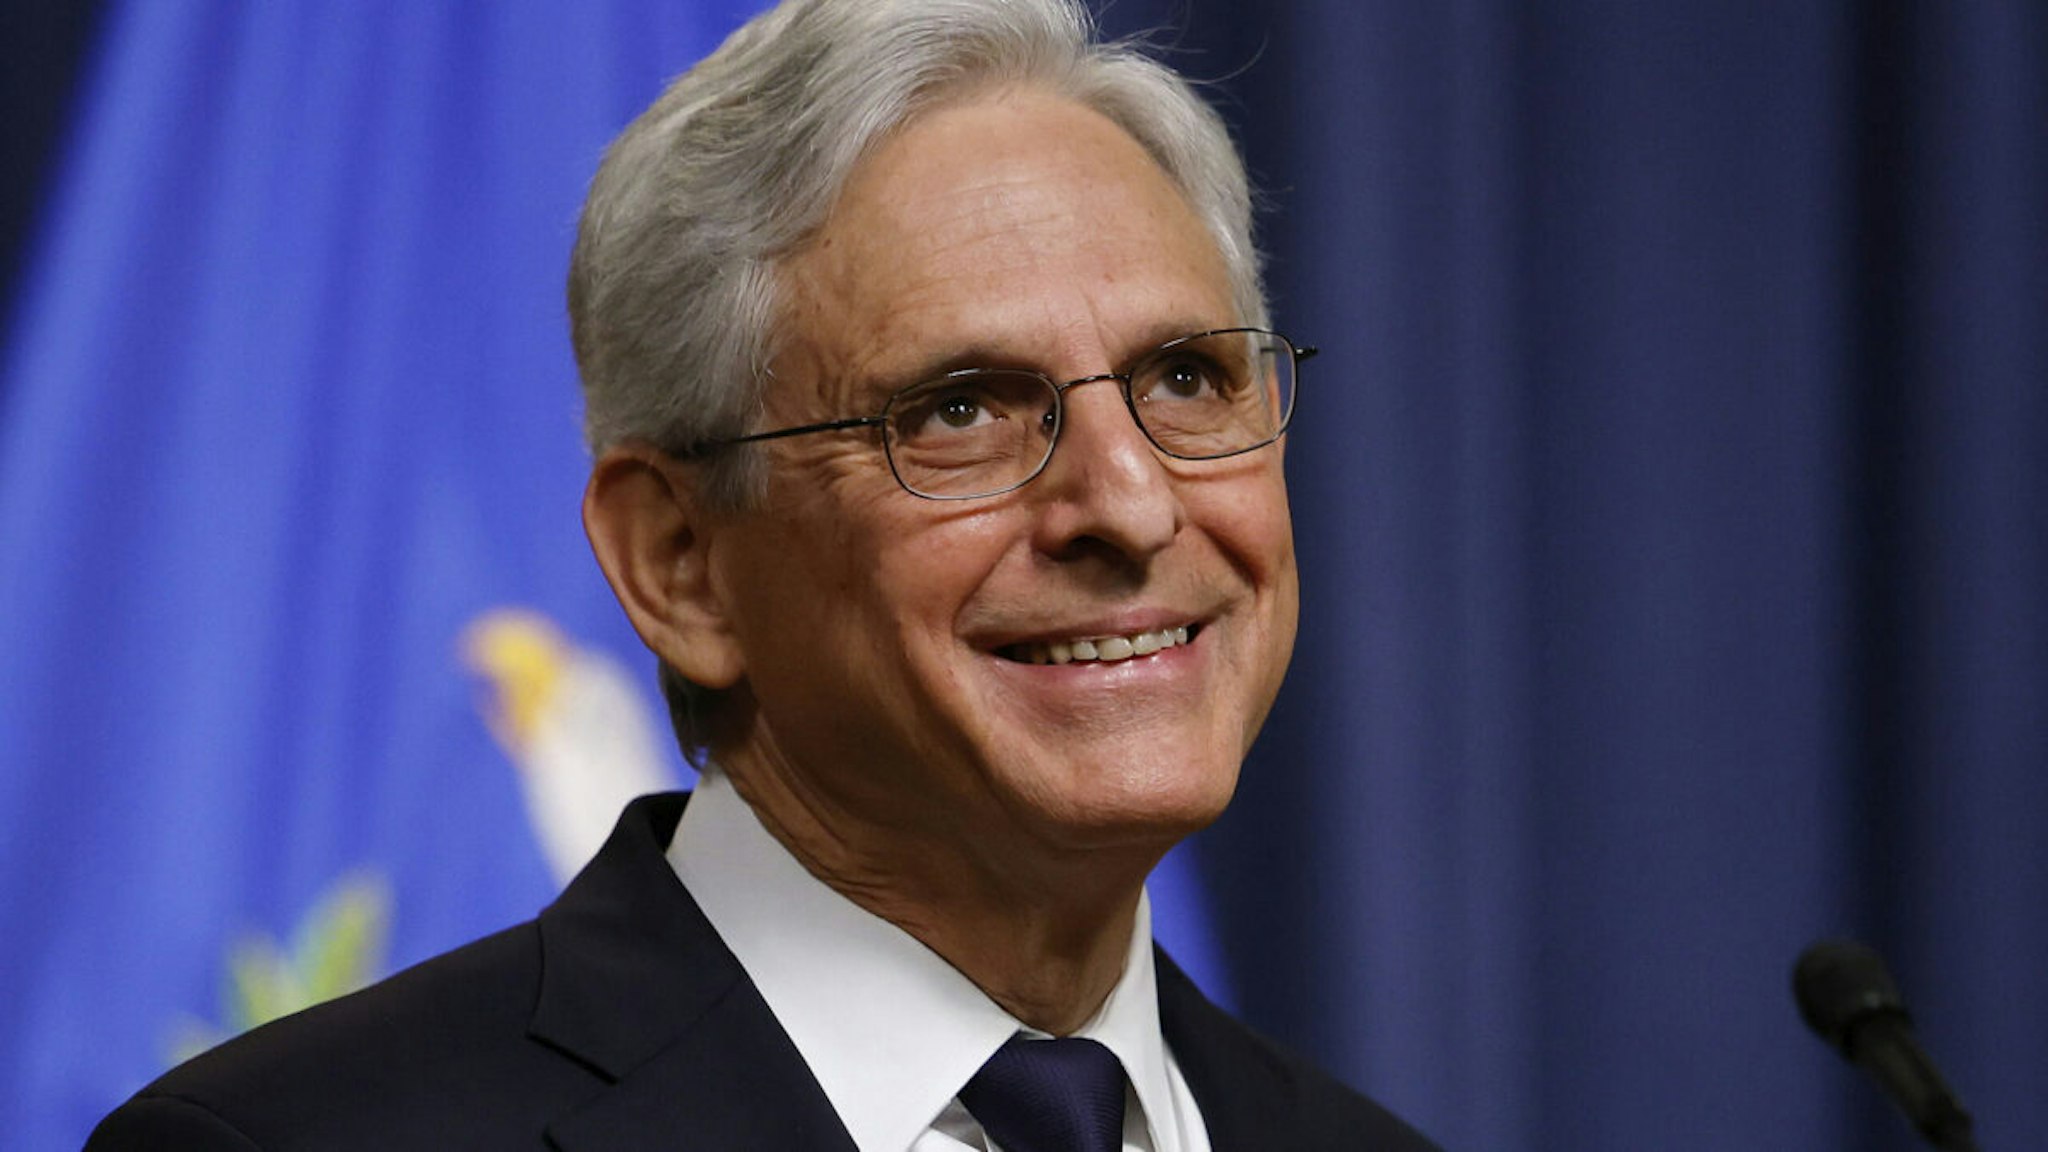 WASHINGTON, DC - JUNE 23: U.S. Attorney General Merrick Garland reacts to a reporter's question while annoucing the arrest of Chinese chemical company employees as part of an investigation into the fentanyl precursor supply chain during a news conference at the Robert F. Kennedy headquarters building on June 23, 2023 in Washington, DC. The incitements against Hubei Amarvel Biotech mark the first time the U.S. is prosecuting companies that manufacture the precursor chemicals used to make fentanyl, a powerful drug that is fueling the opioid epidemic.